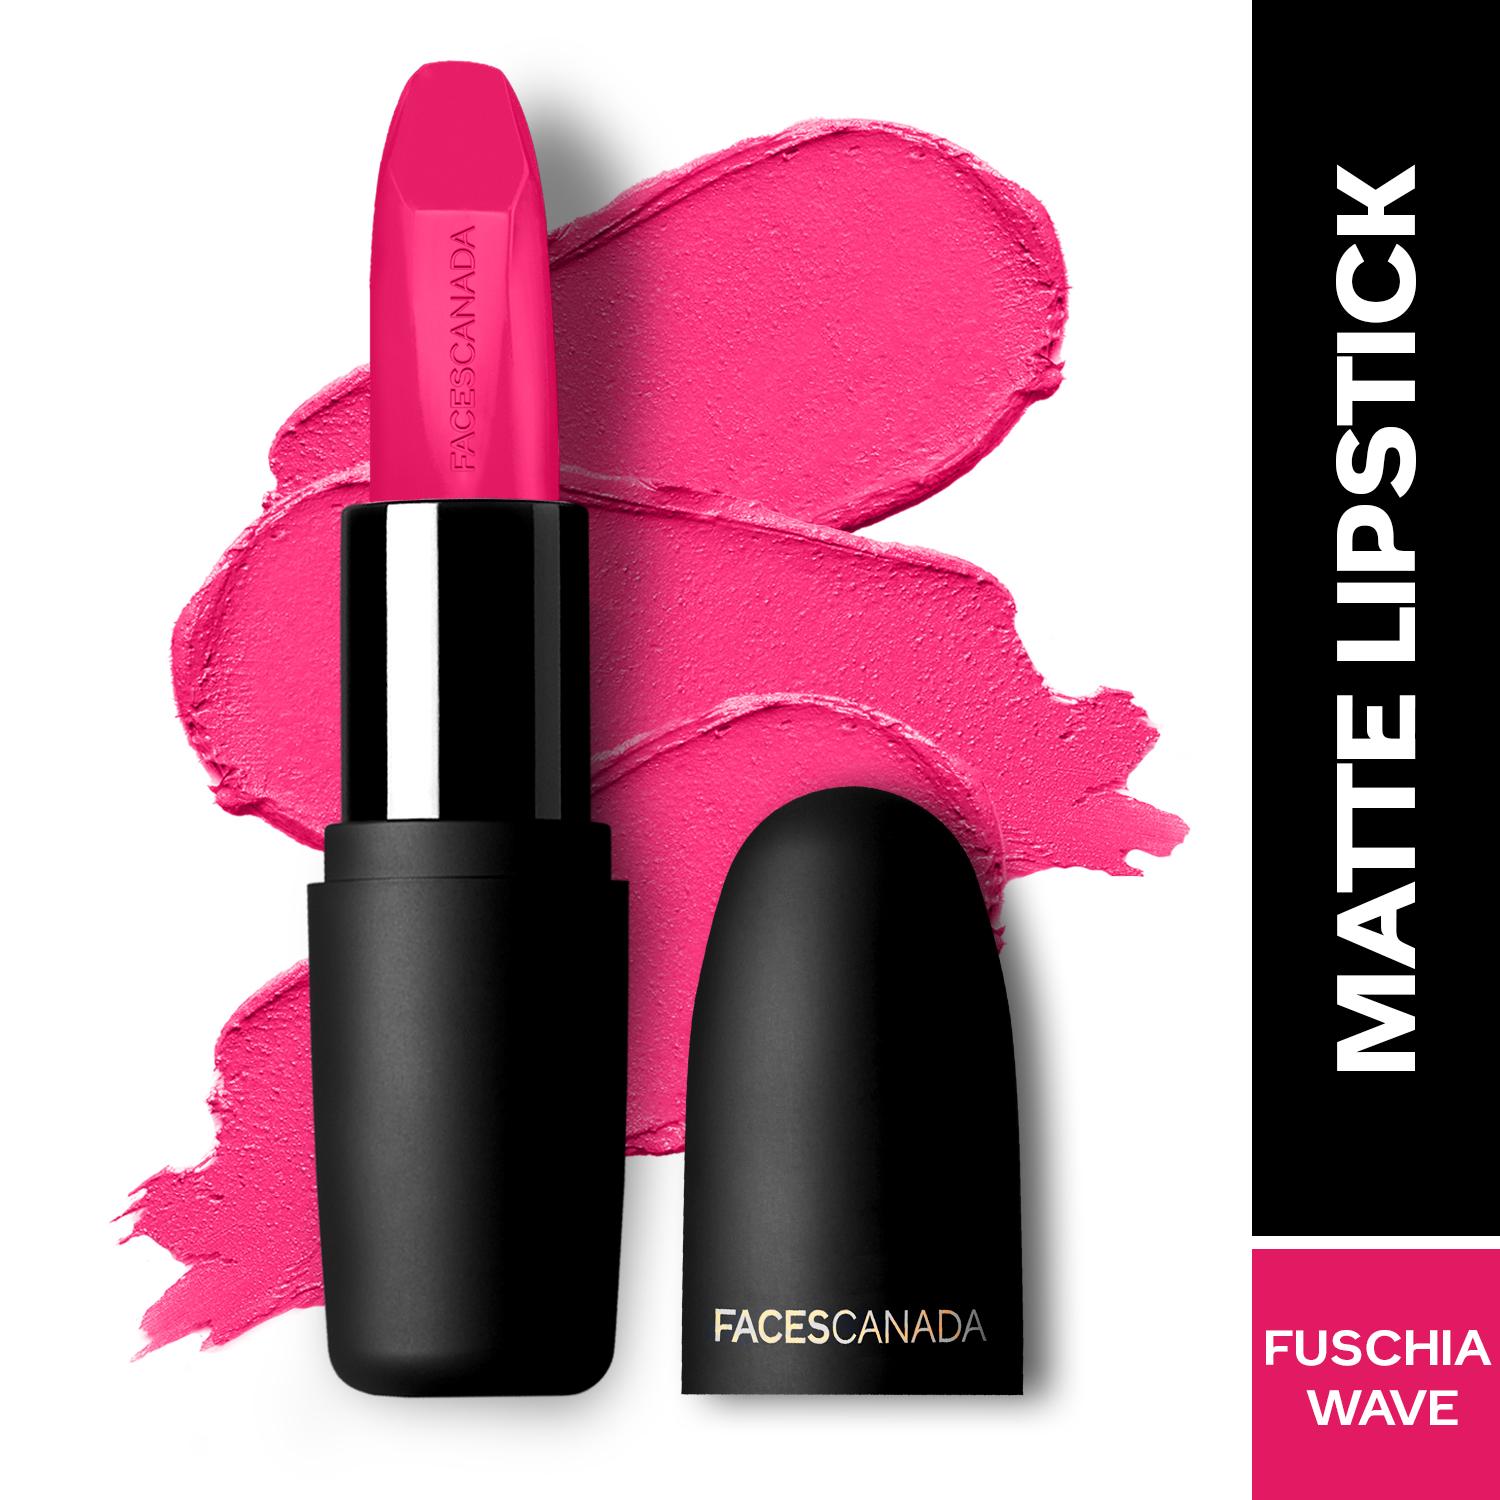 Faces Canada | Faces Canada Weightless Matte Lipstick, Pigmented and Hydrated Lips - Fuschia Wave 02 (4.5 g)